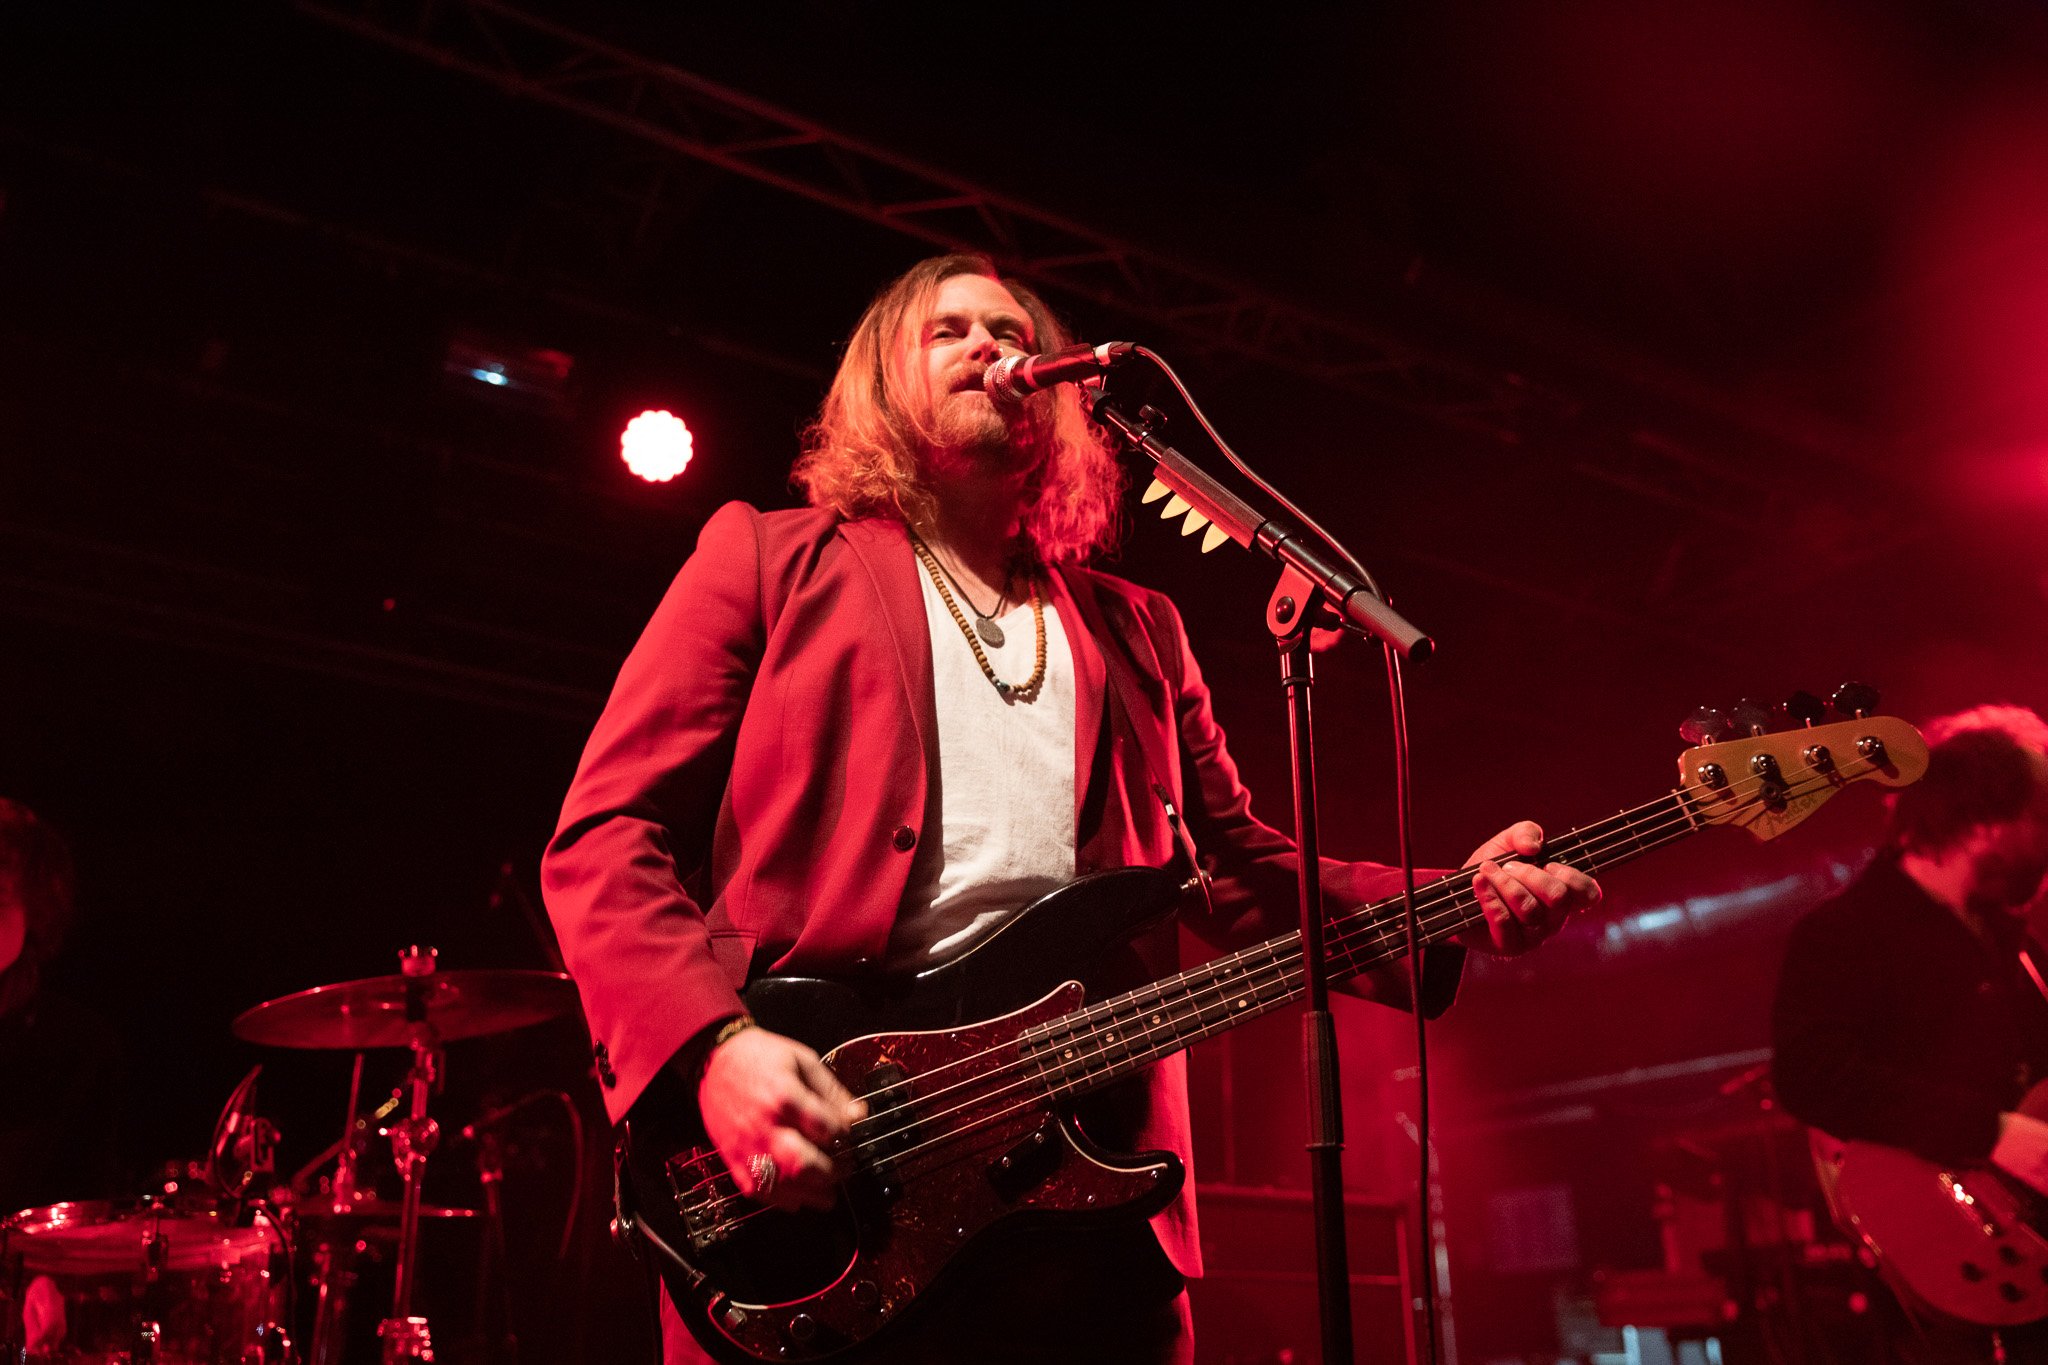  The Imbeciles at the O2 Academy in Liverpool on April 1st 2022 ©Johann Wierzbicki 